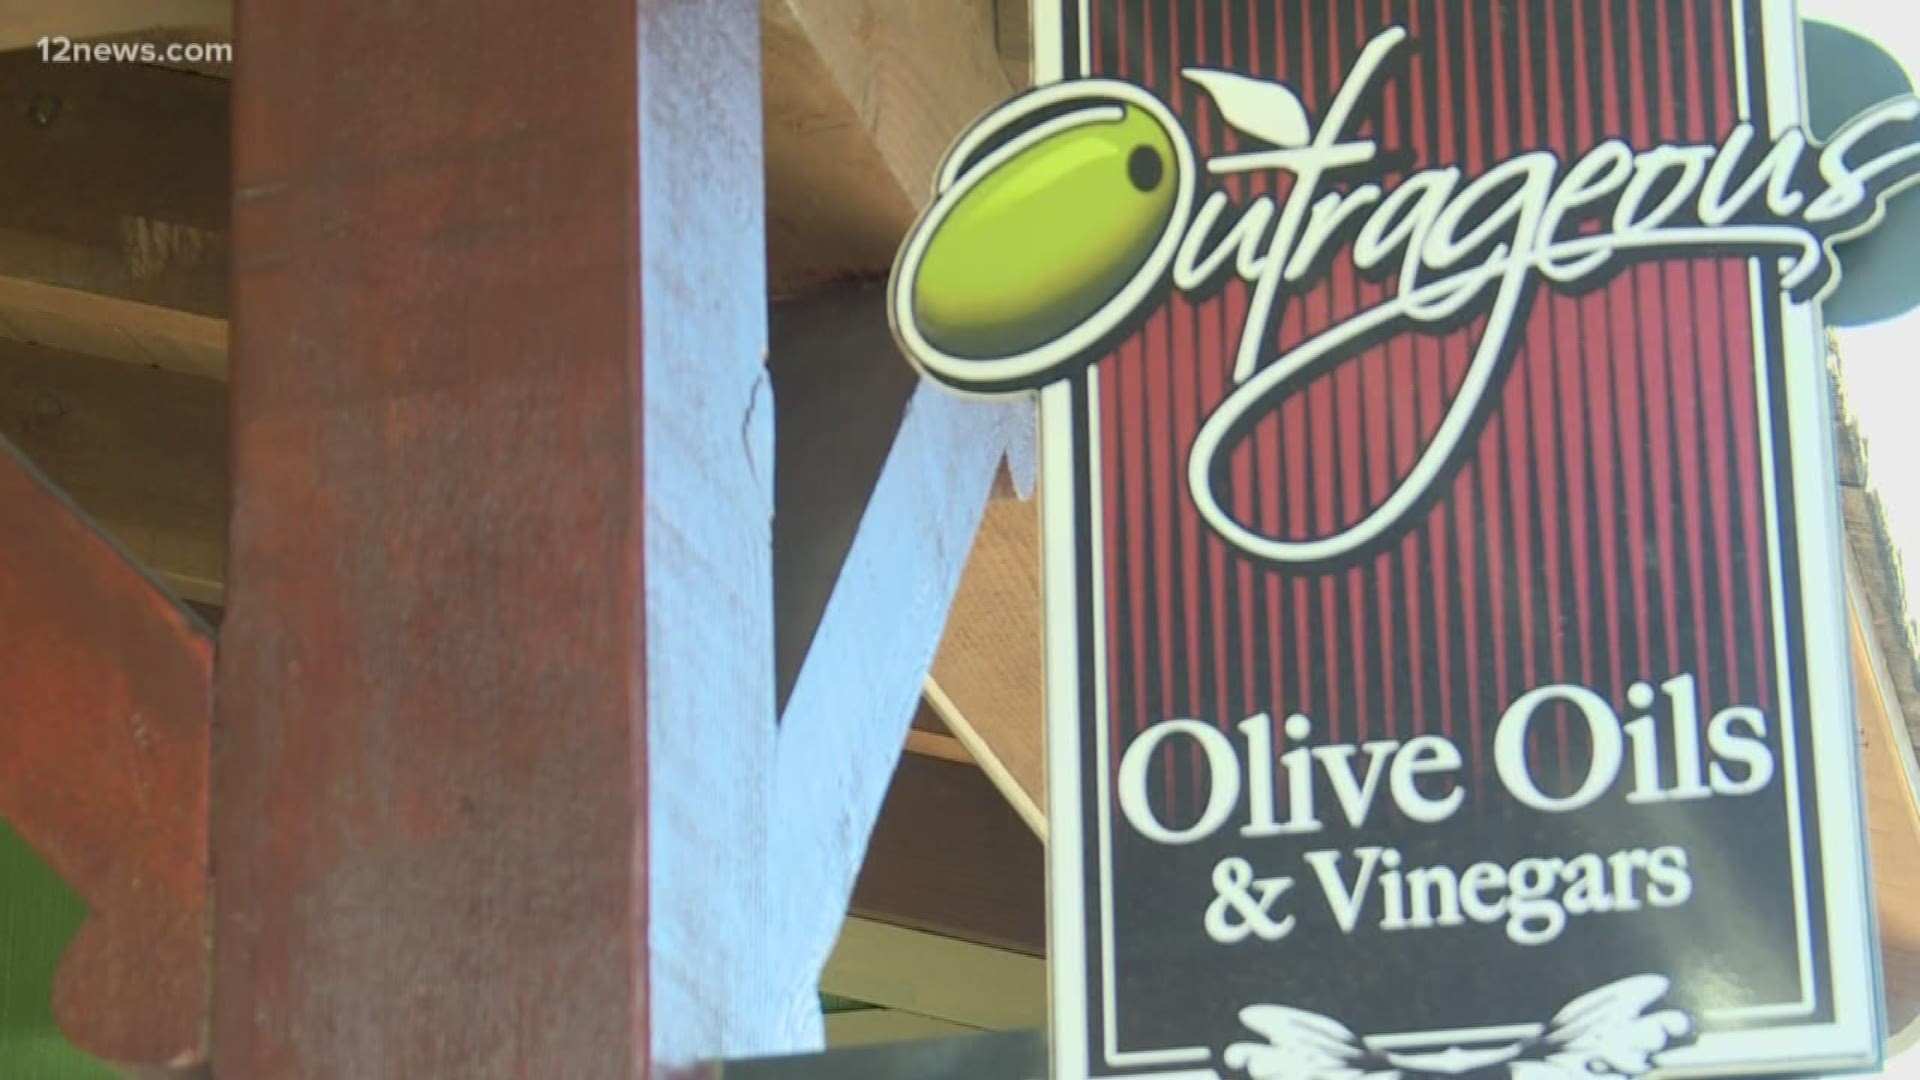 Outragoeus Olive Oil & Vinegar in Scottsdale is extra premium from all over the world and people are flocking to this hot spot.